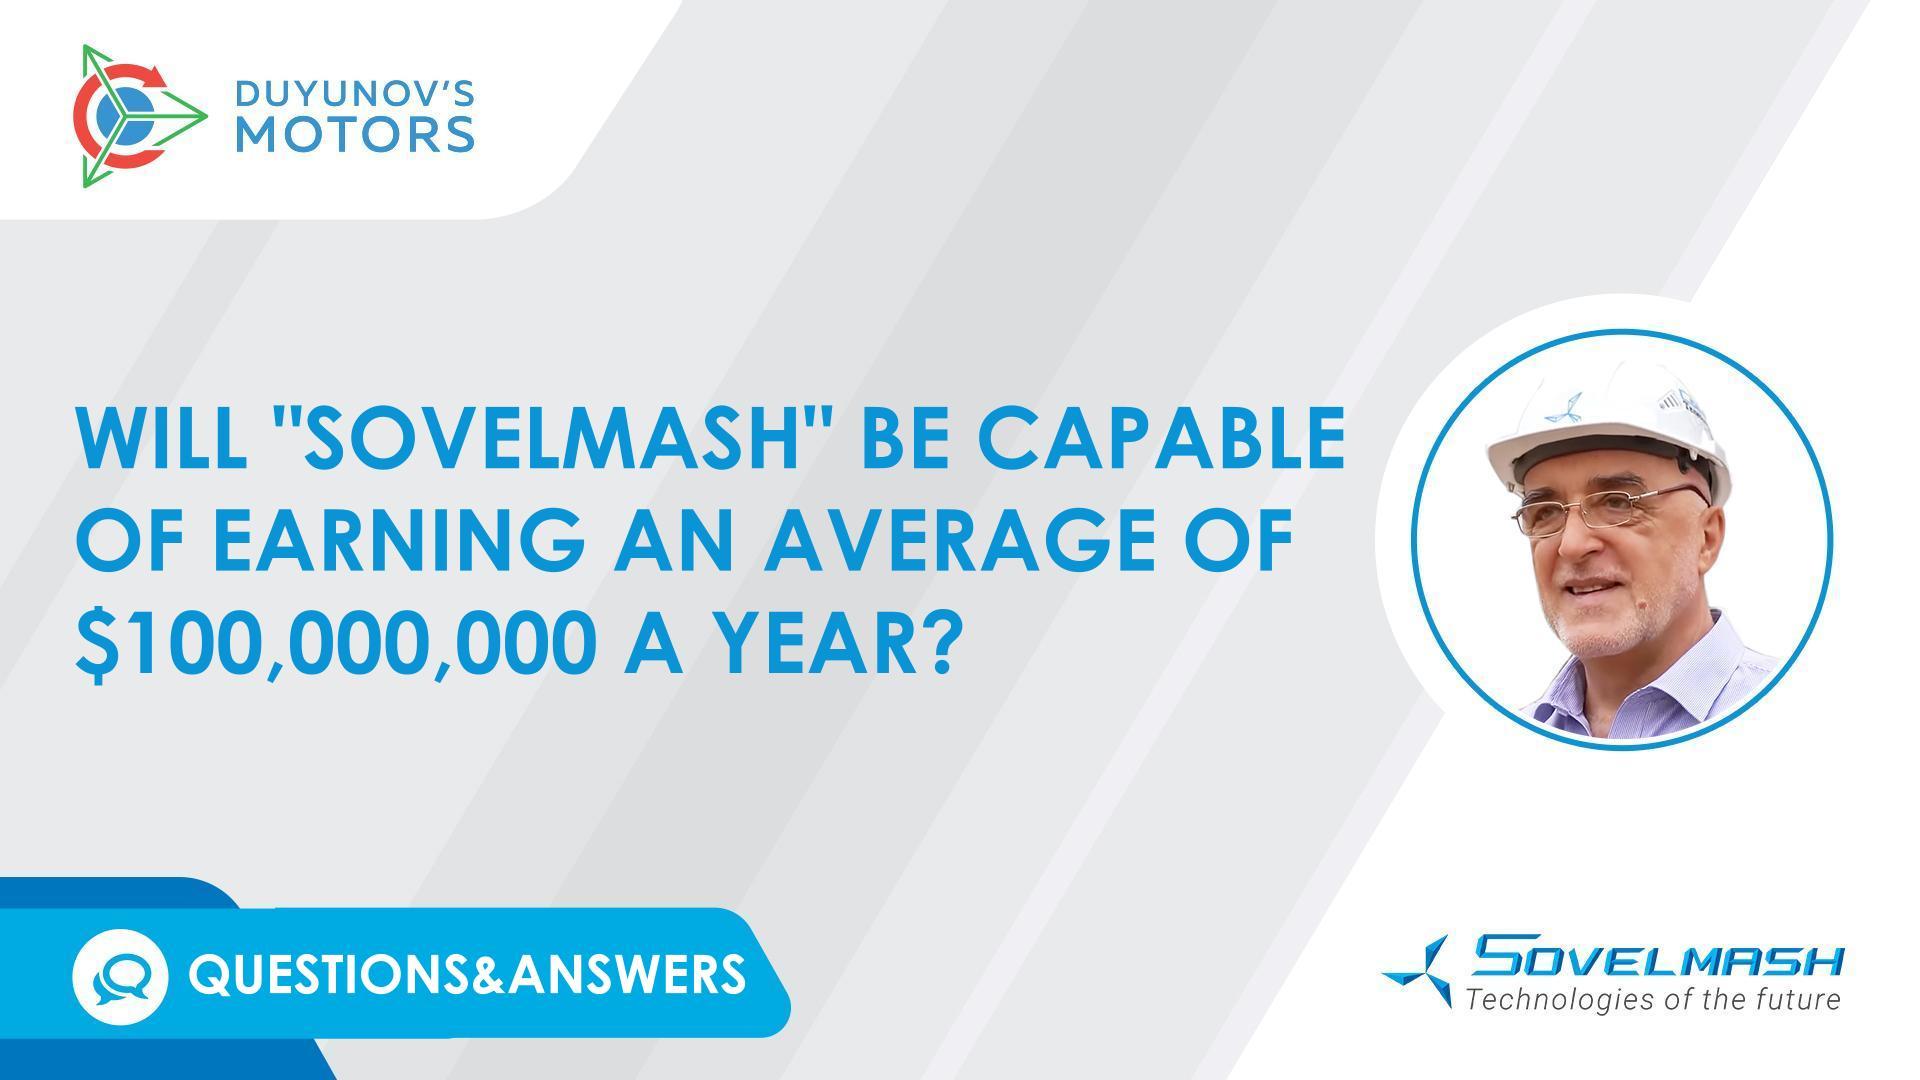 Q&A / How much can the "Sovelmash" D&E earn?